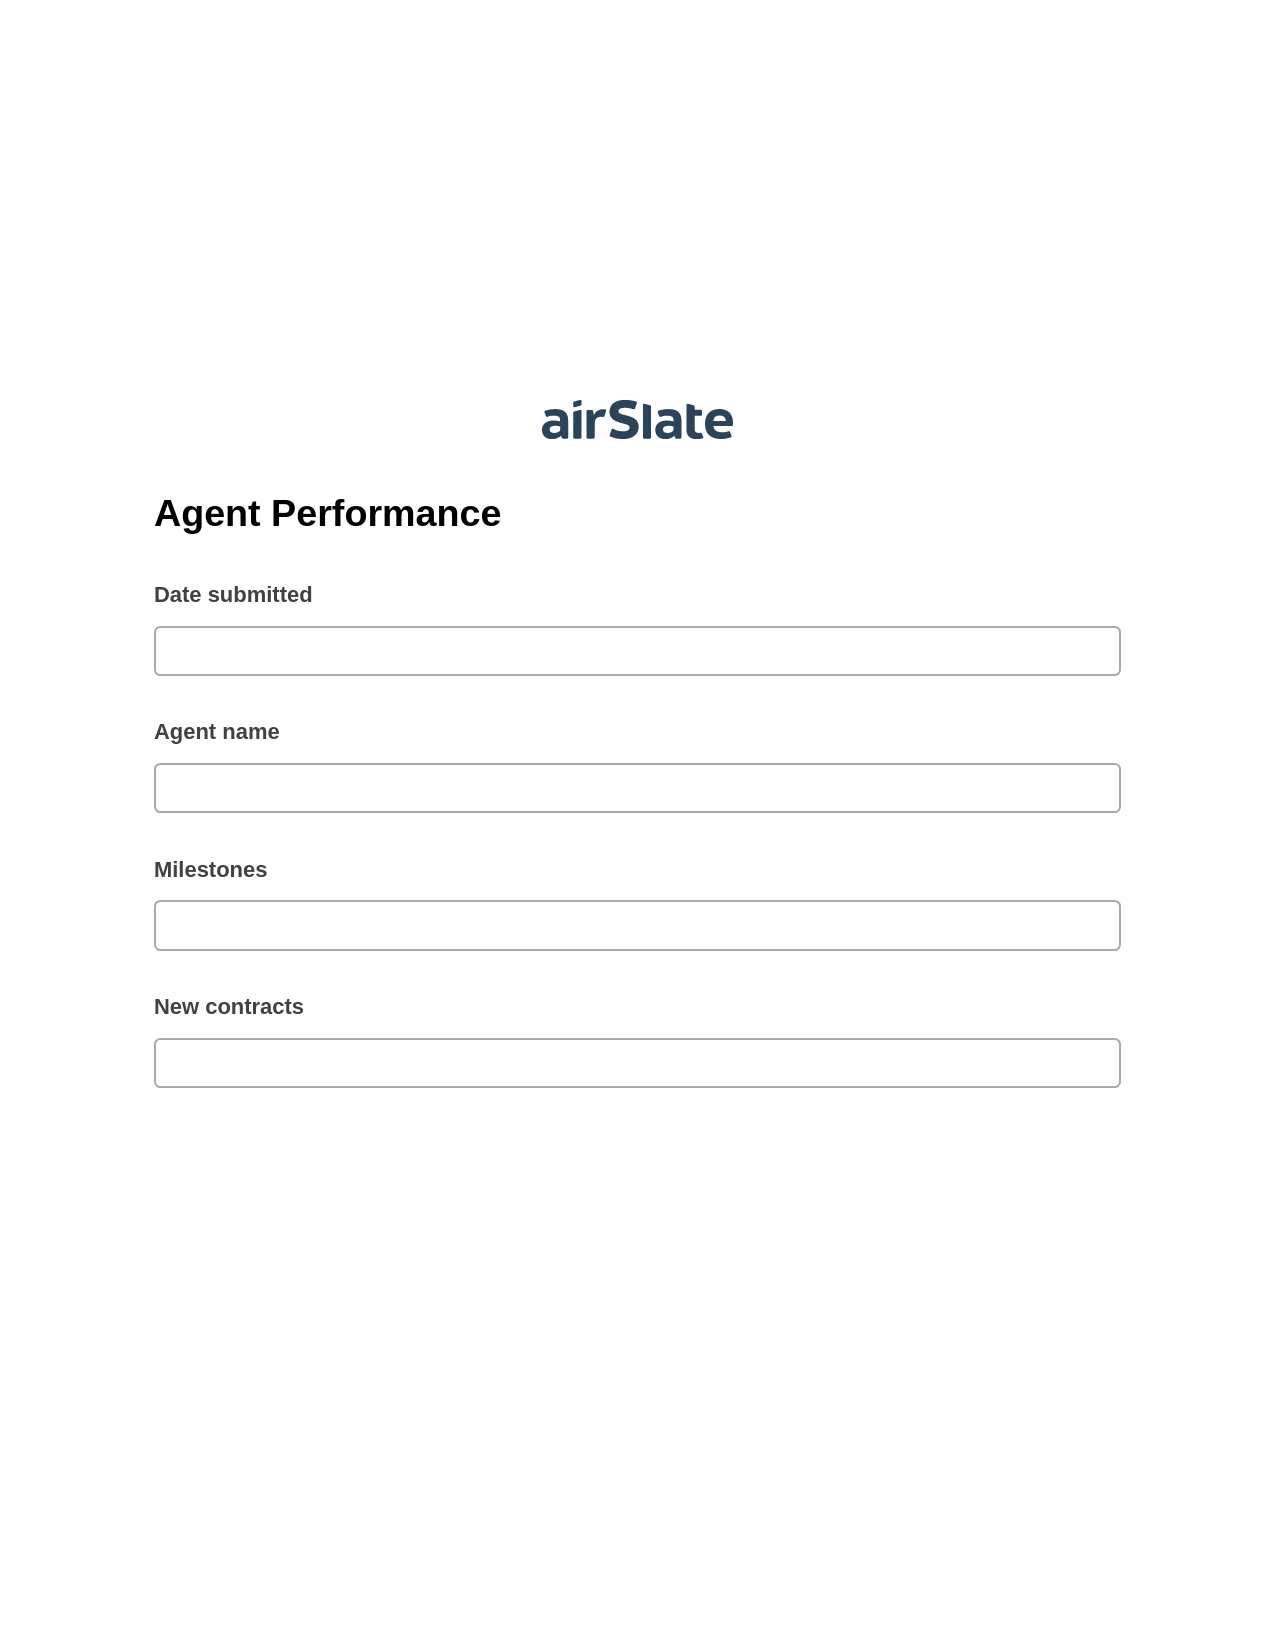 Agent Performance Pre-fill Dropdowns from Airtable, Create NetSuite Record bot, Export to MySQL Bot